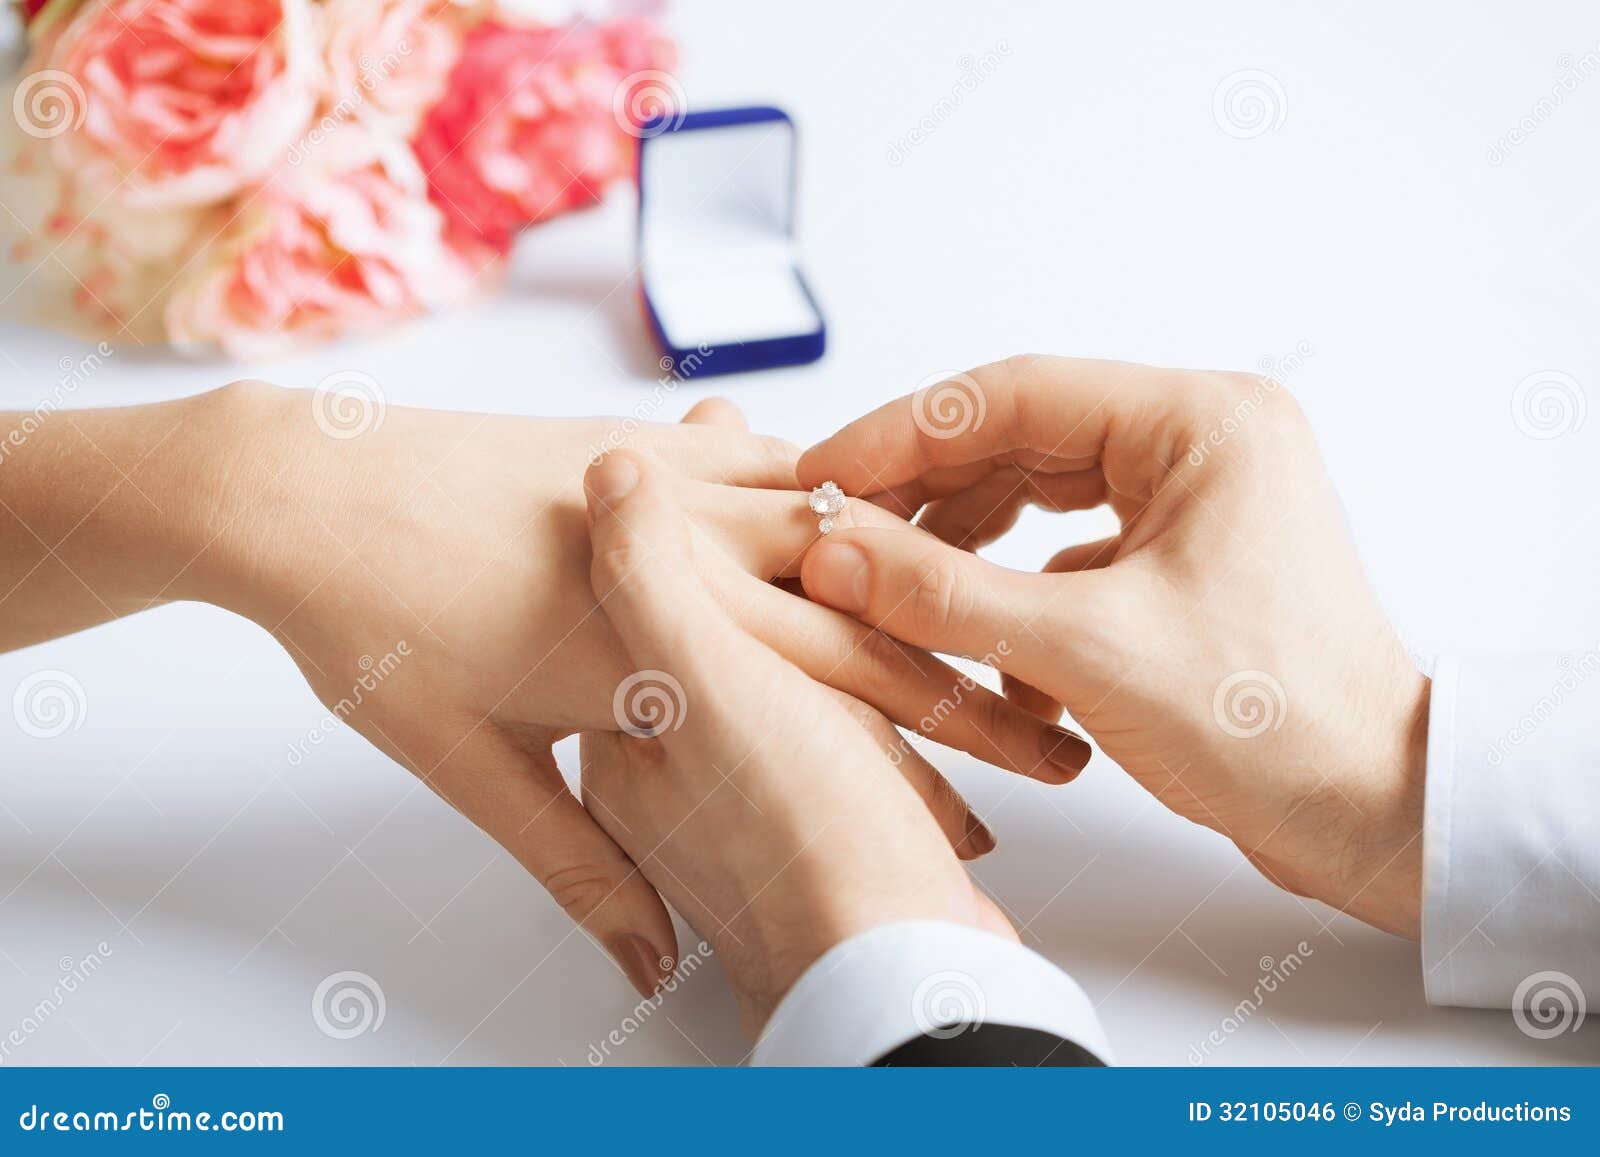 wedding rings which hand